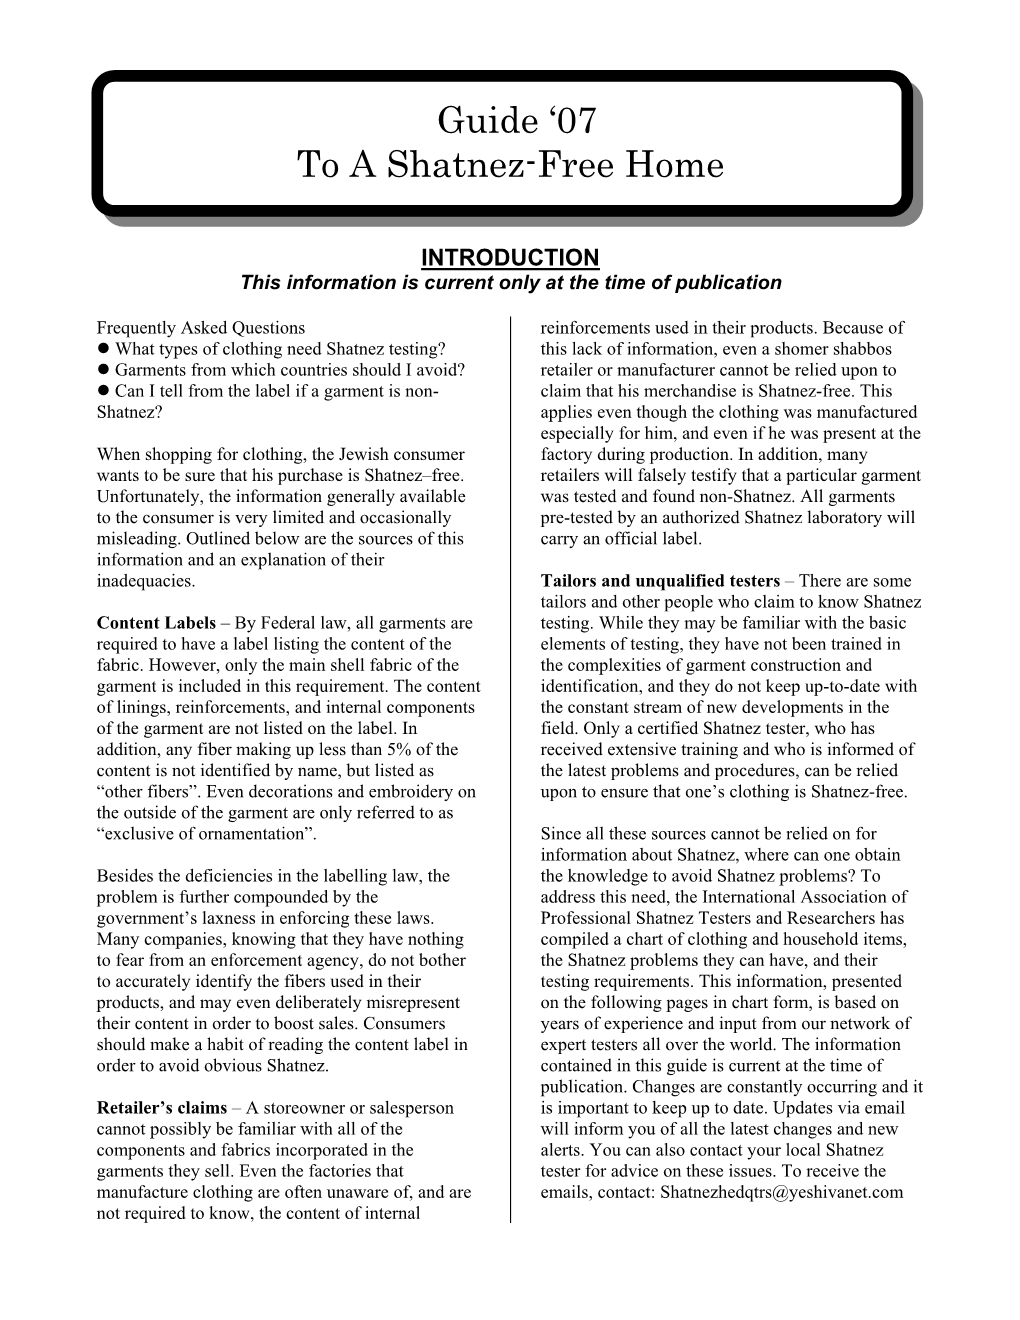 Guide '07 to a Shatnez-Free Home